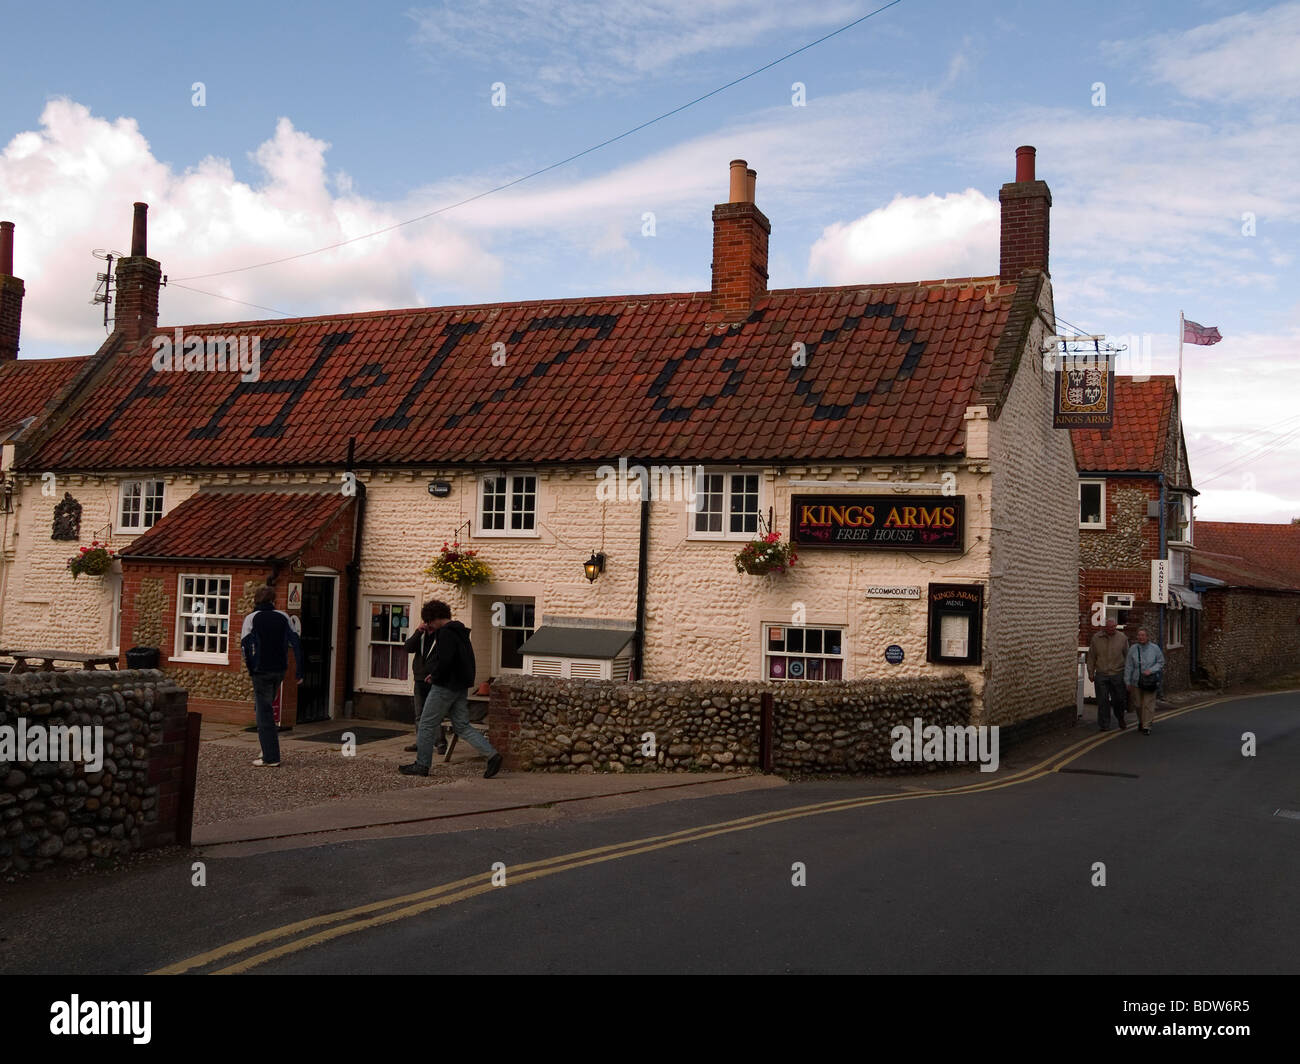 Kings Arms Public House Blakeney Norfolk with roof tiles showing 'FH' (Free House) and date of 1760 Stock Photo